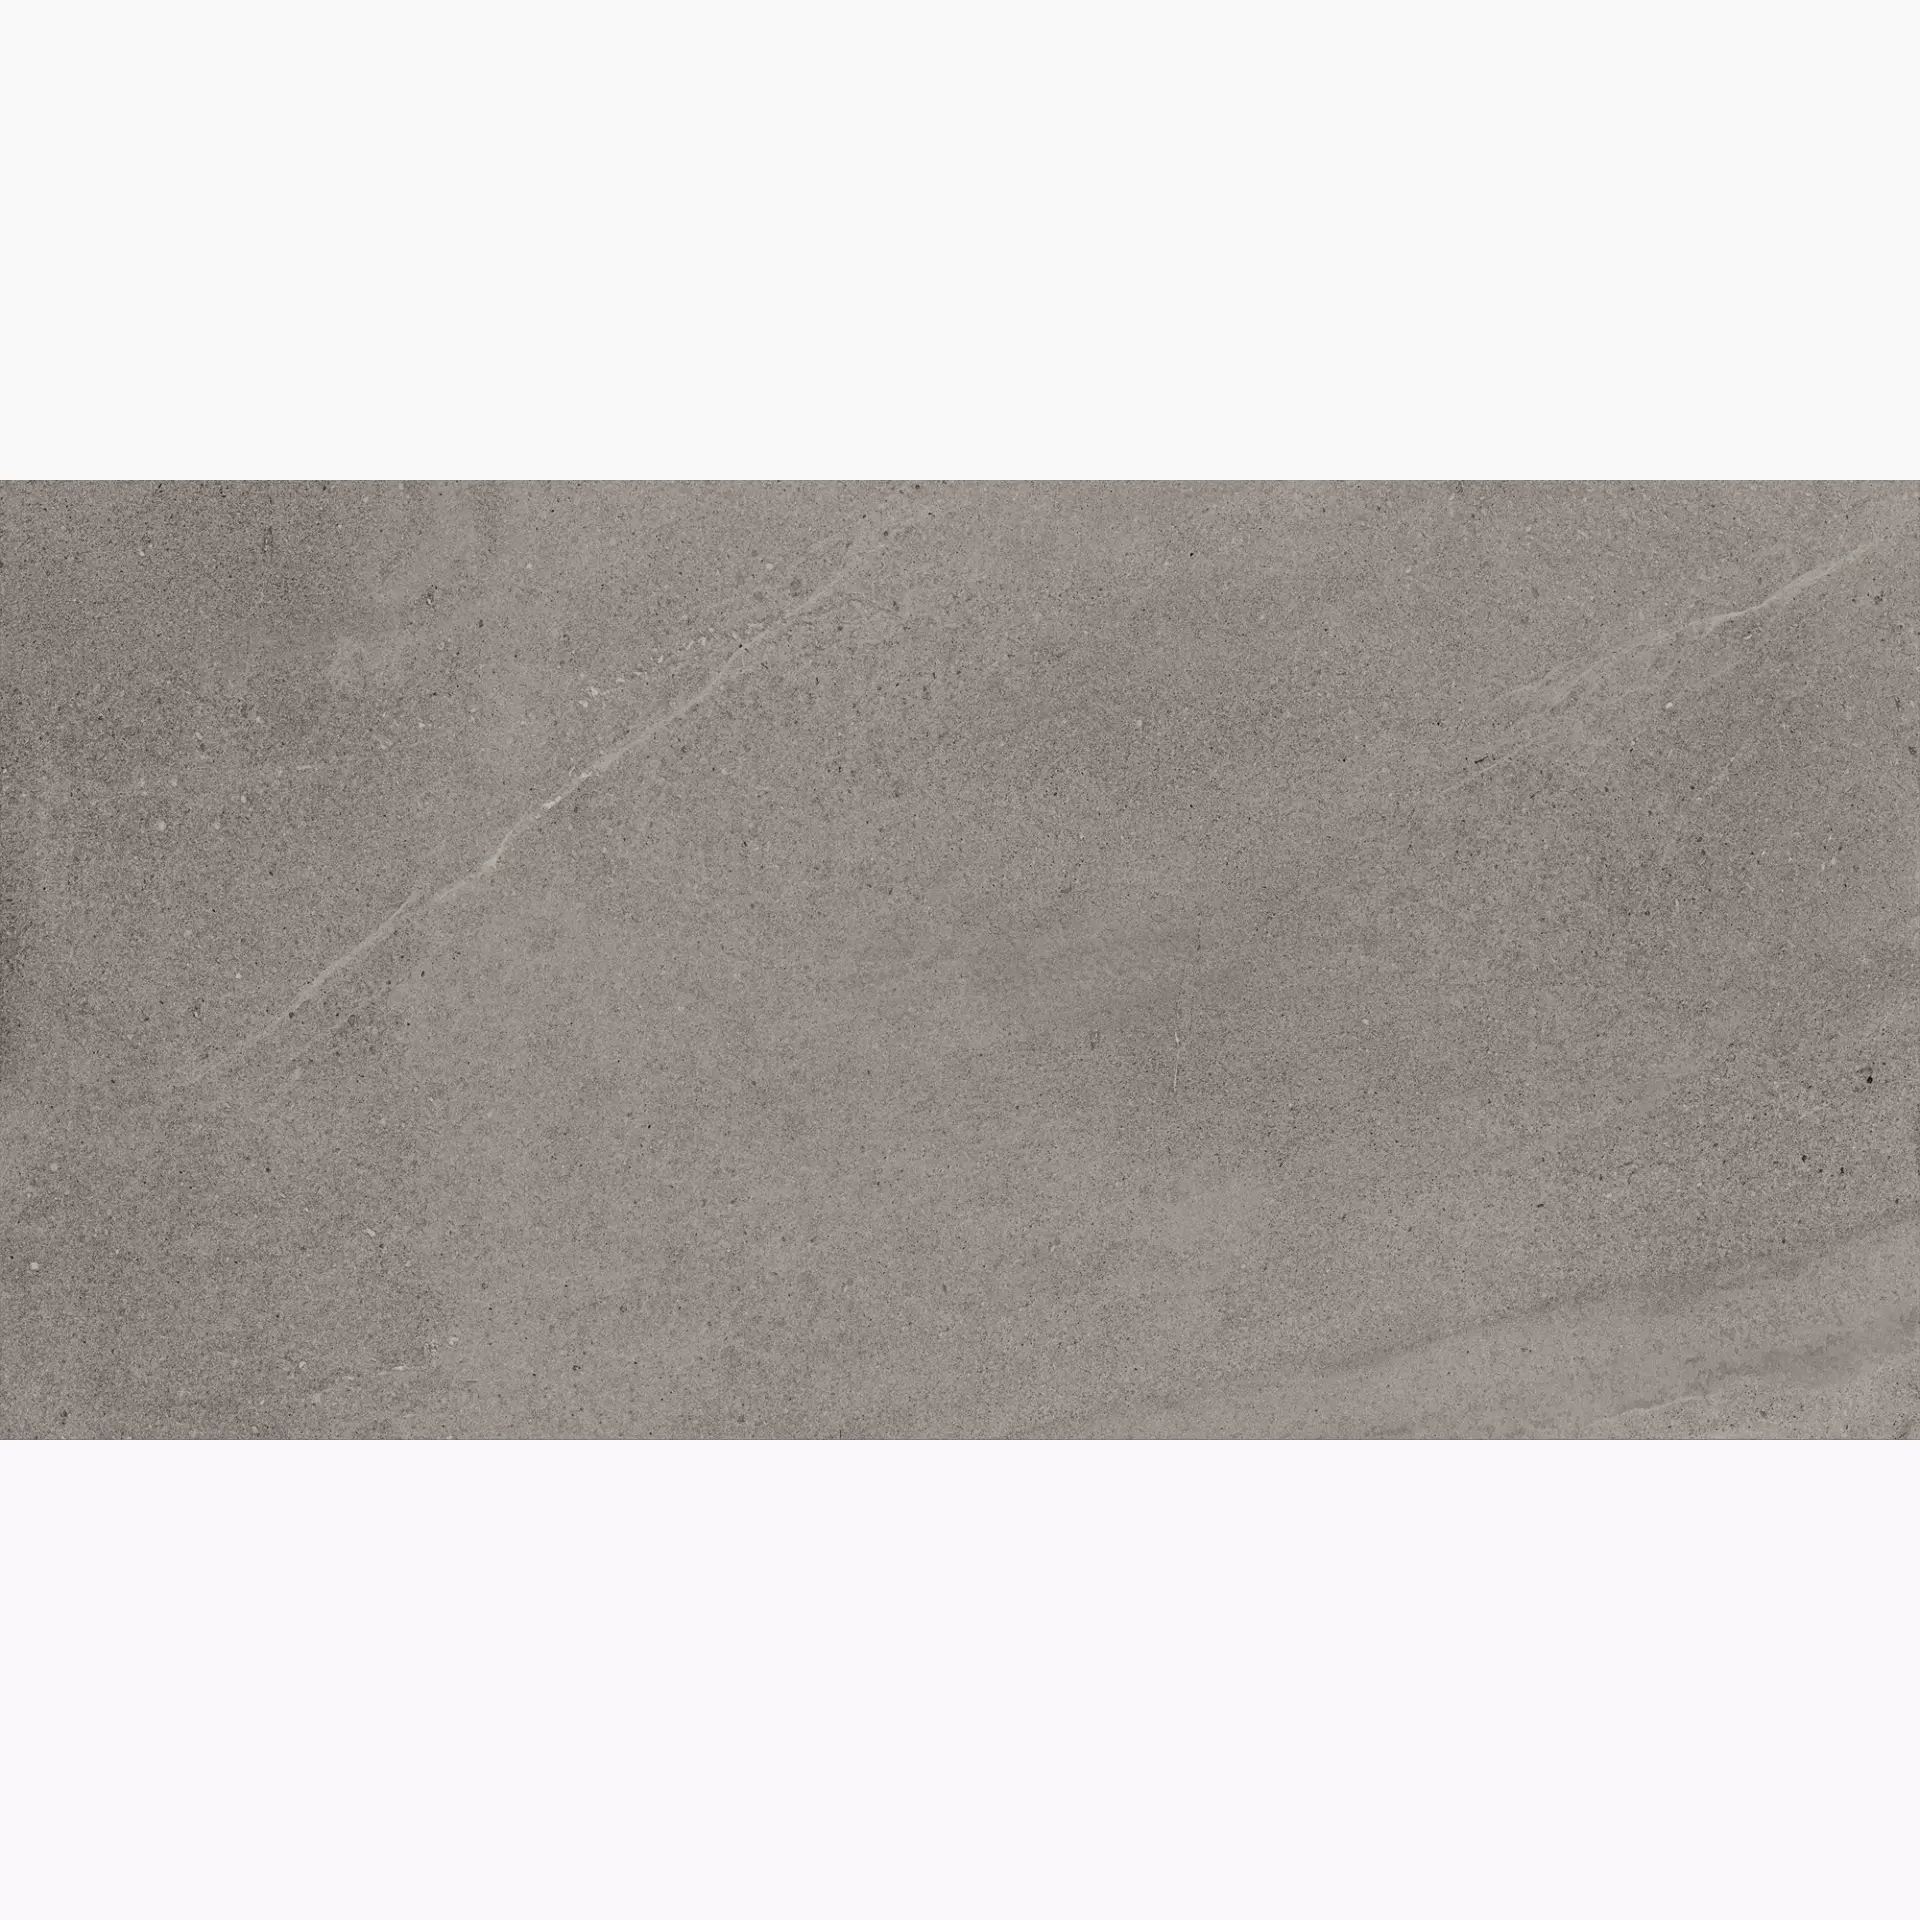 Cottodeste Limestone Slate Naturale Protect EG-LS30 30x60cm rectified 14mm